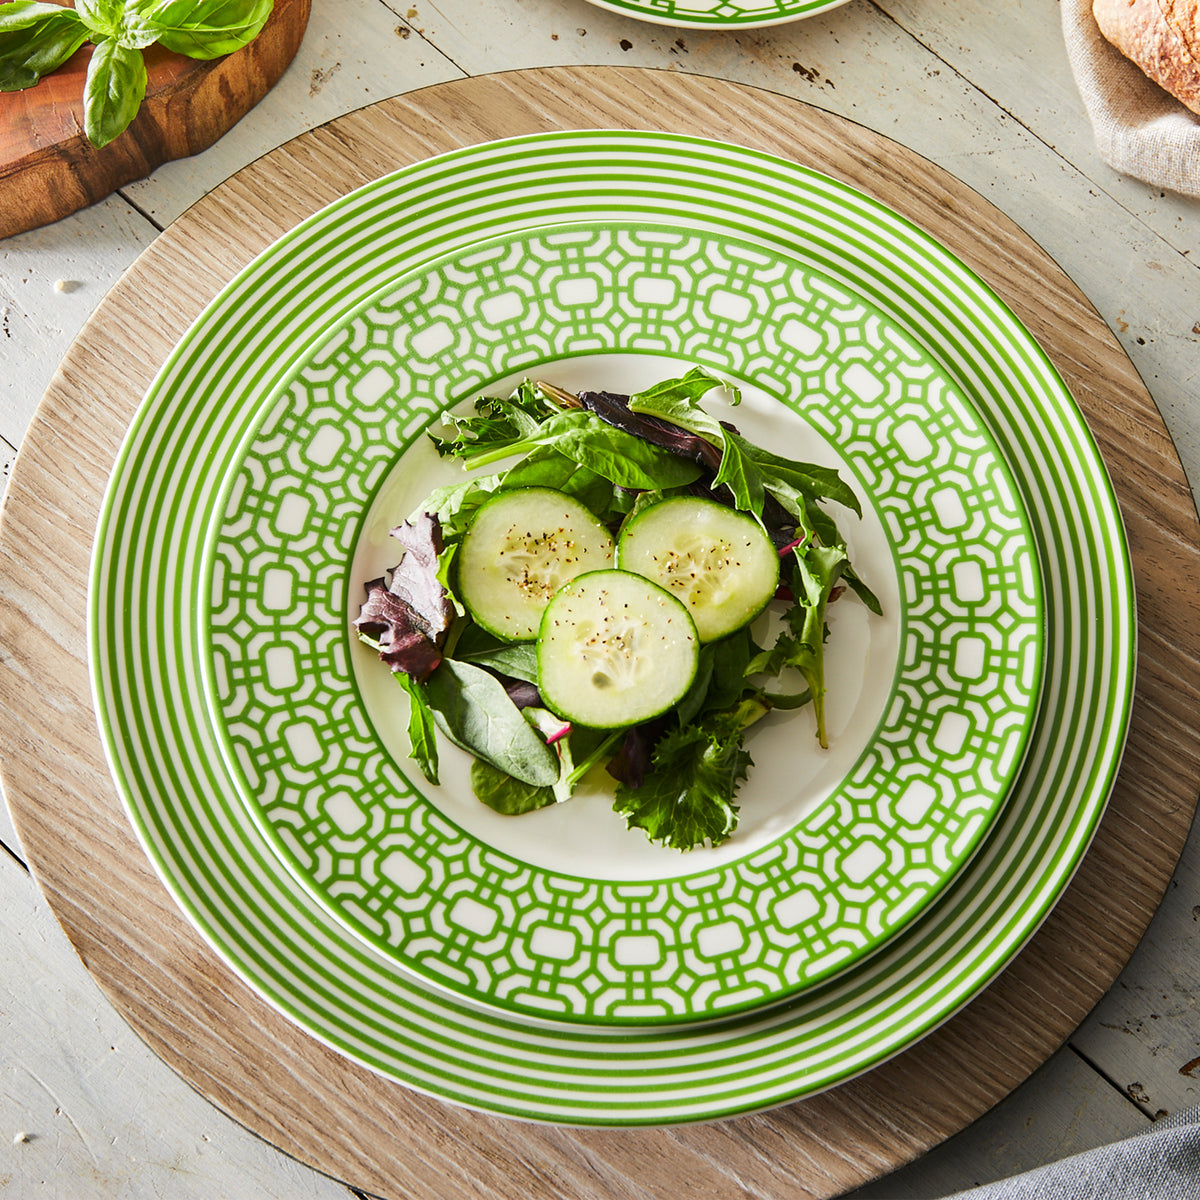 A salad with cucumber slices and mixed greens on a decorative Newport Stripe Verde Rimmed Dinner Plate, made of high-fired porcelain, placed on a wooden table setting by Caskata Artisanal Home.